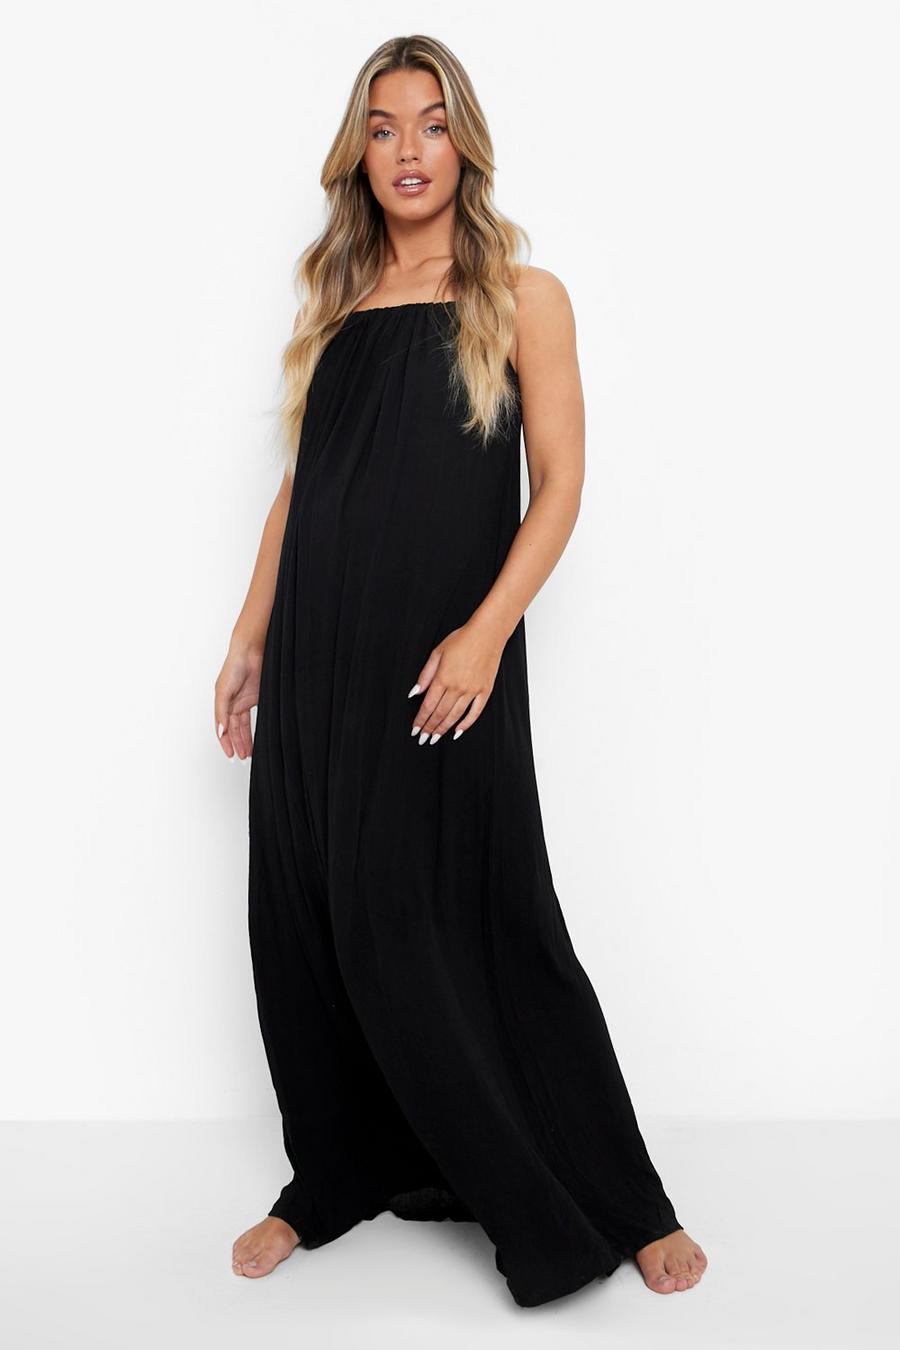 Black Maternity Cheesecloth Strappy Beach Dress